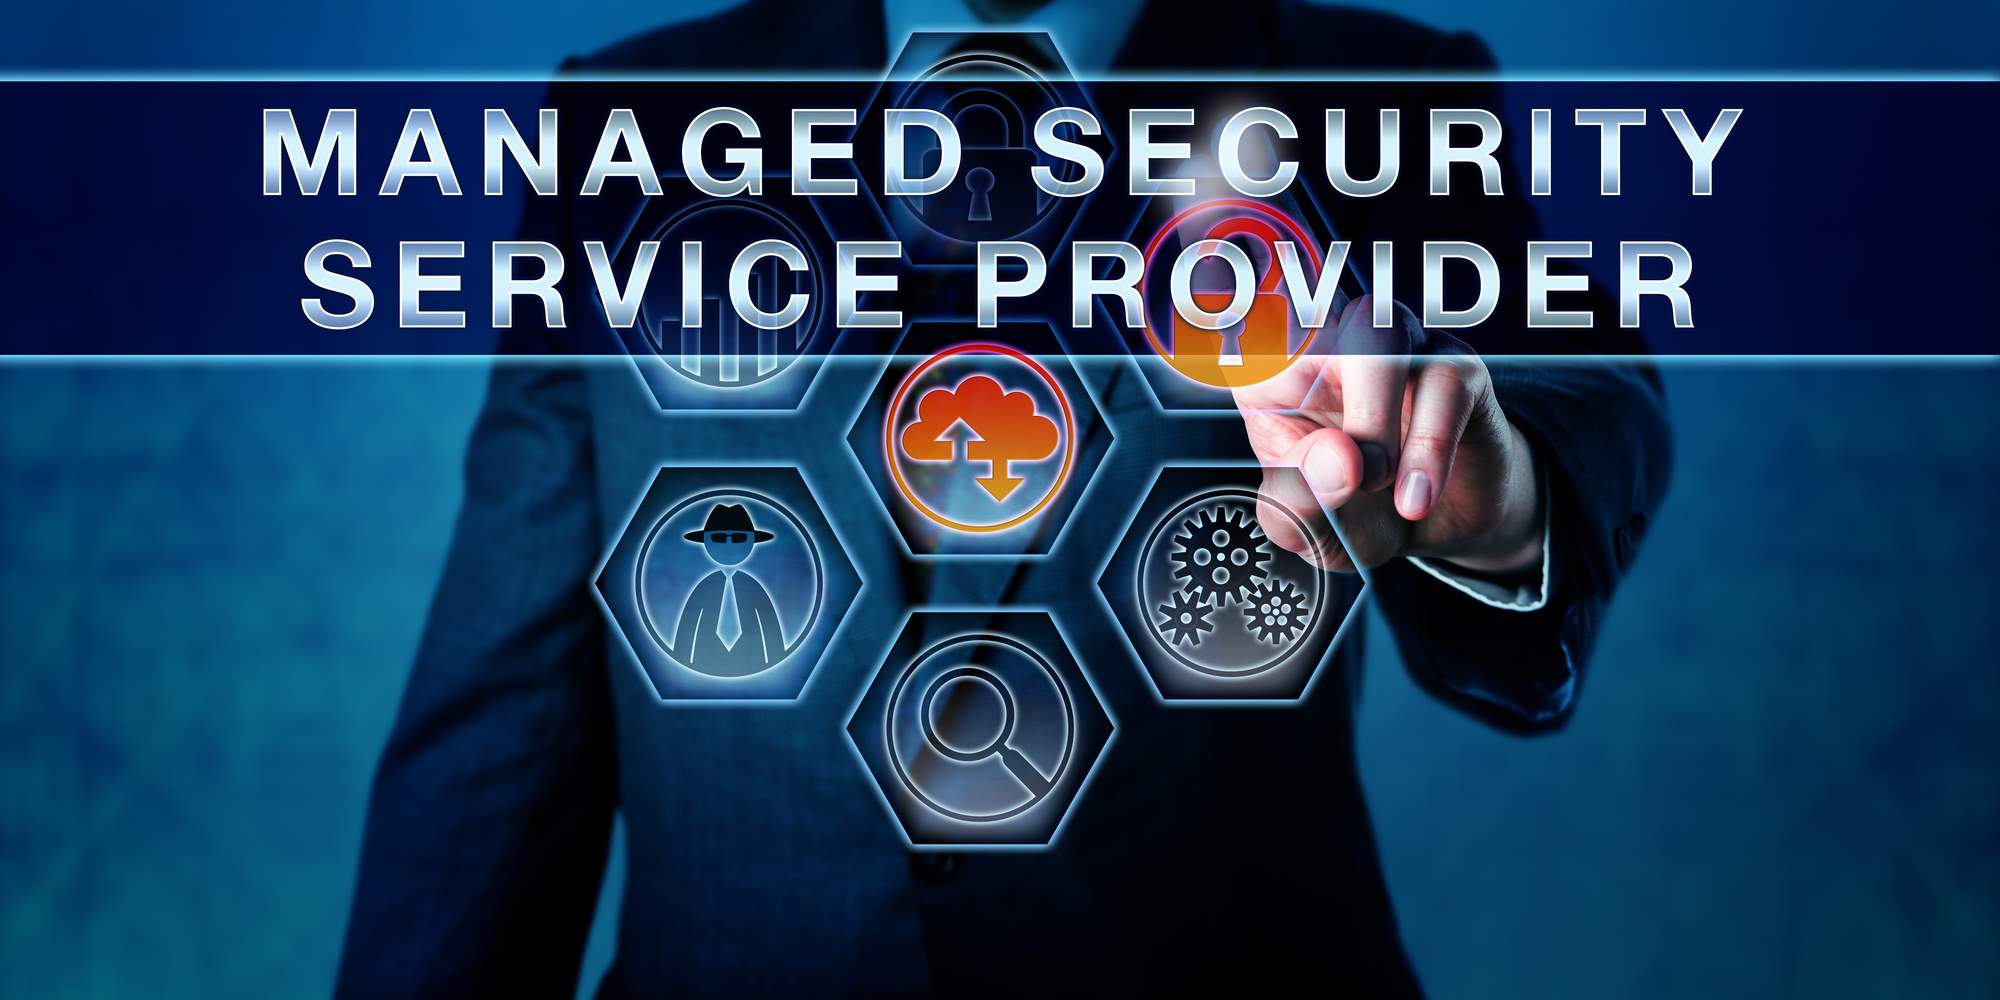 3 Tips for Choosing Security Services for Your Business